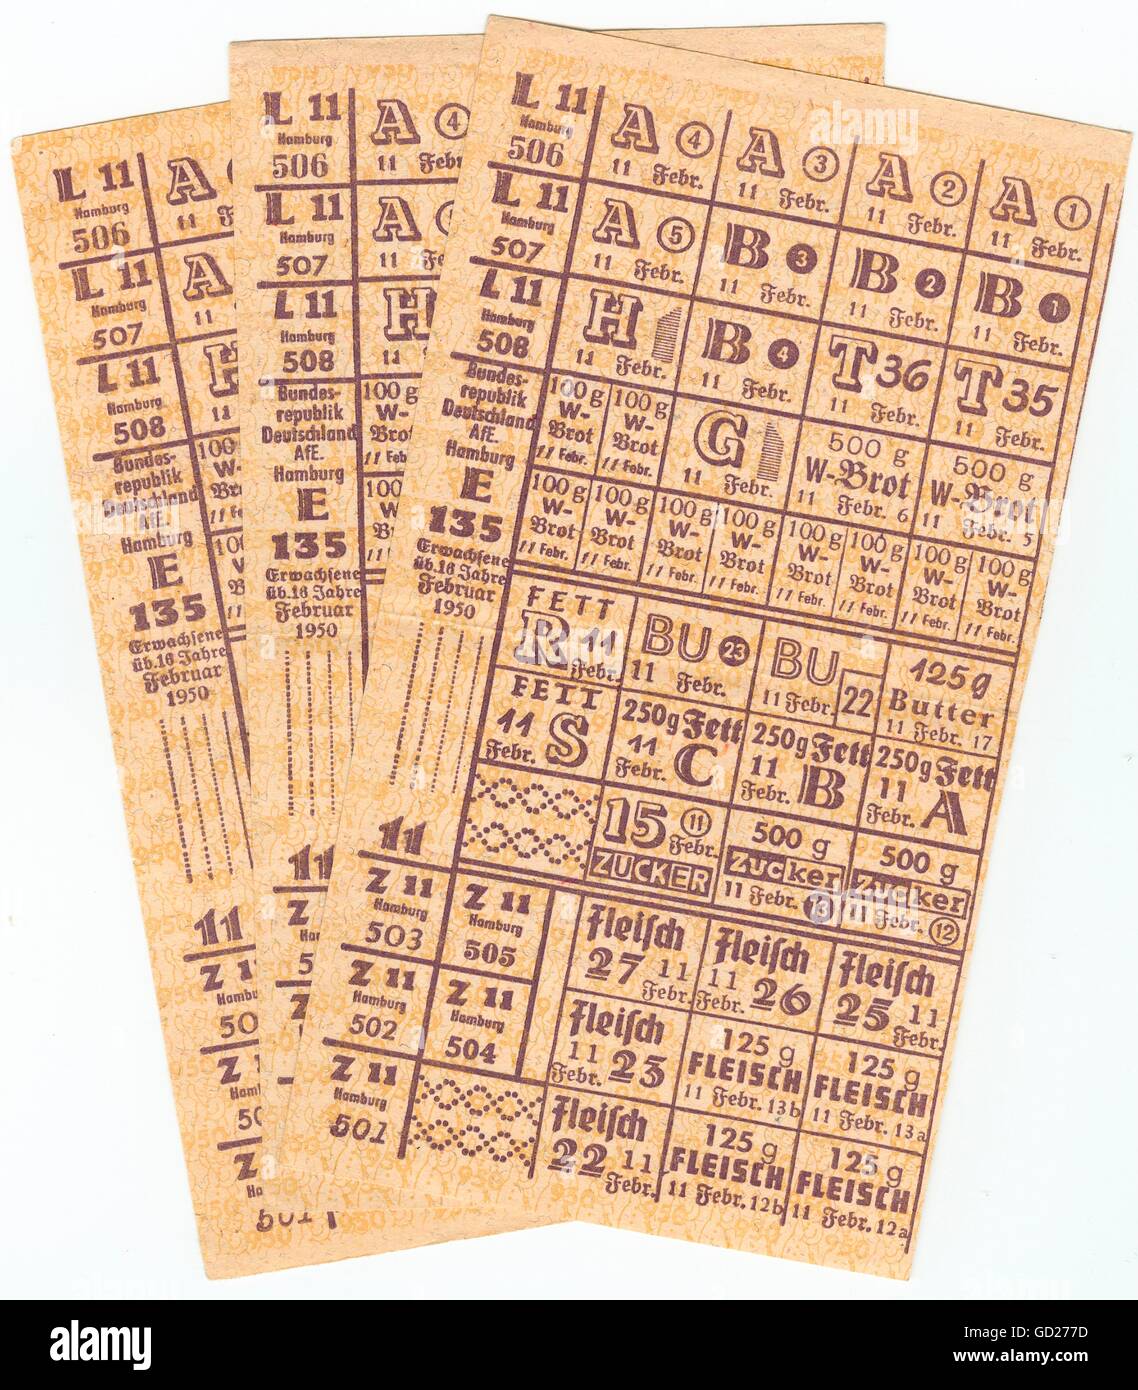 trade, food, 3 food ration cards for adults over 16 years, Hamburg, Germany, February 1950, , Additional-Rights-Clearences-Not Available Stock Photo